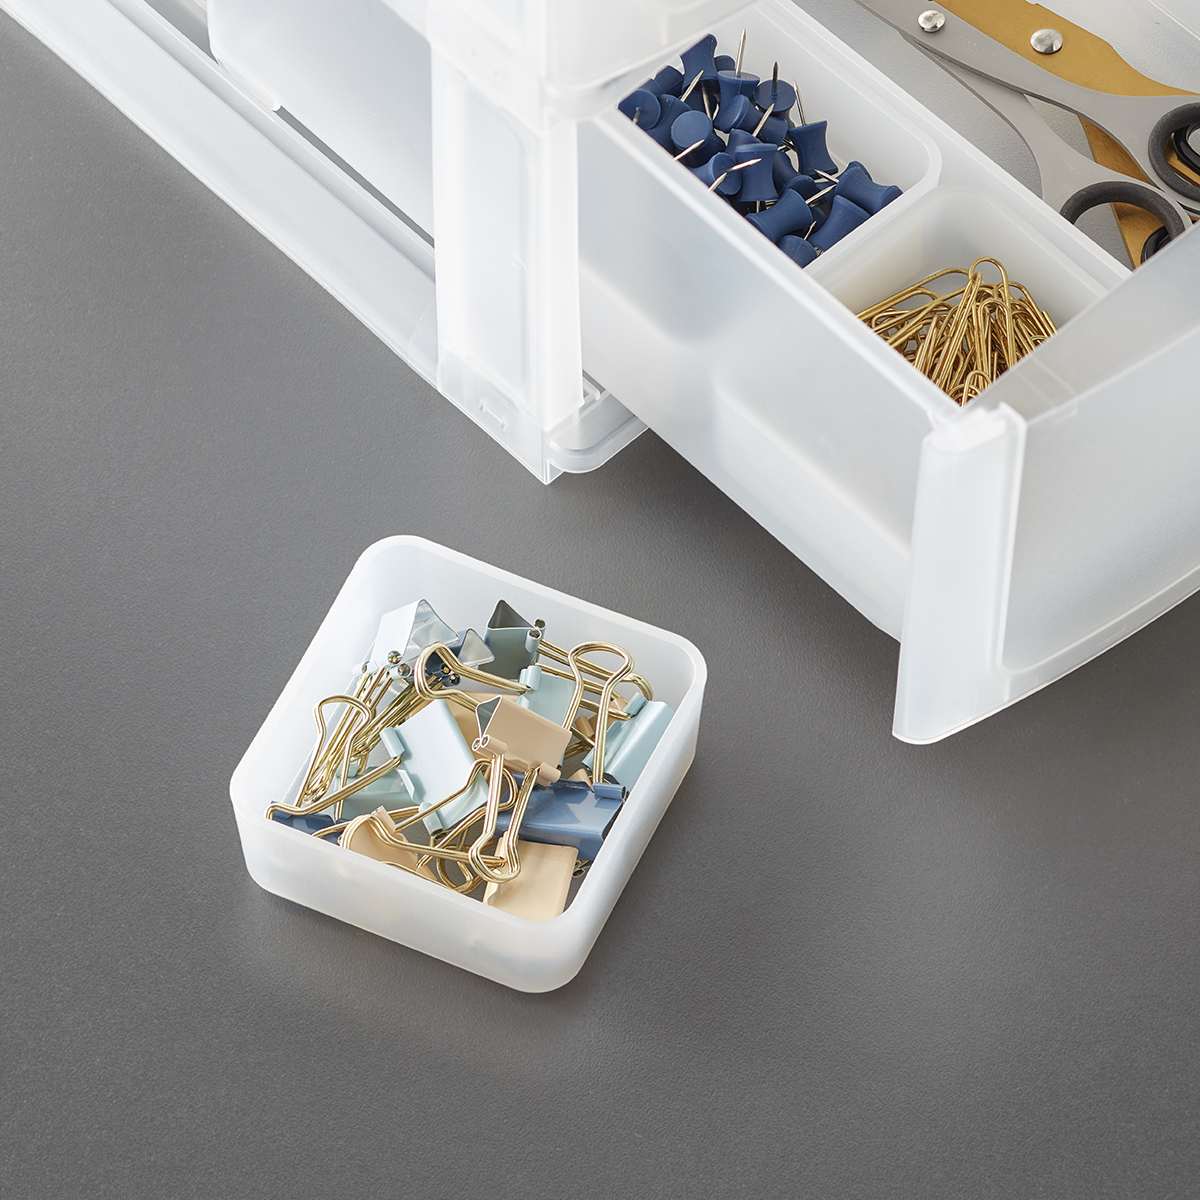 https://www.containerstore.com/catalogimages/434664/10079322_Shimo_small_shallow_drawer_.jpg